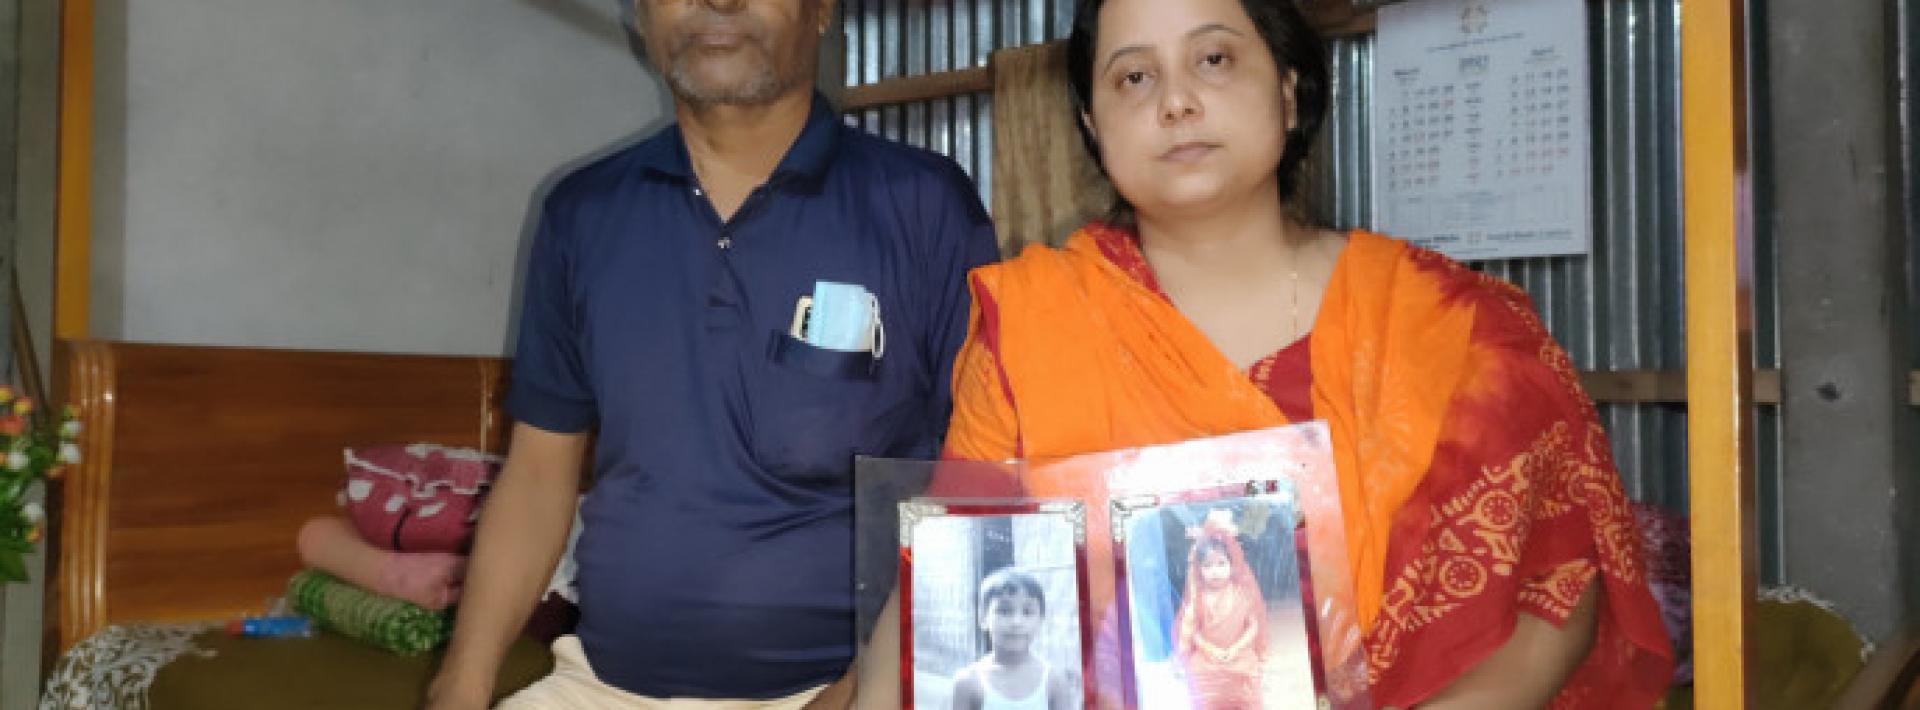 a man and woman face the camera holding two photographs